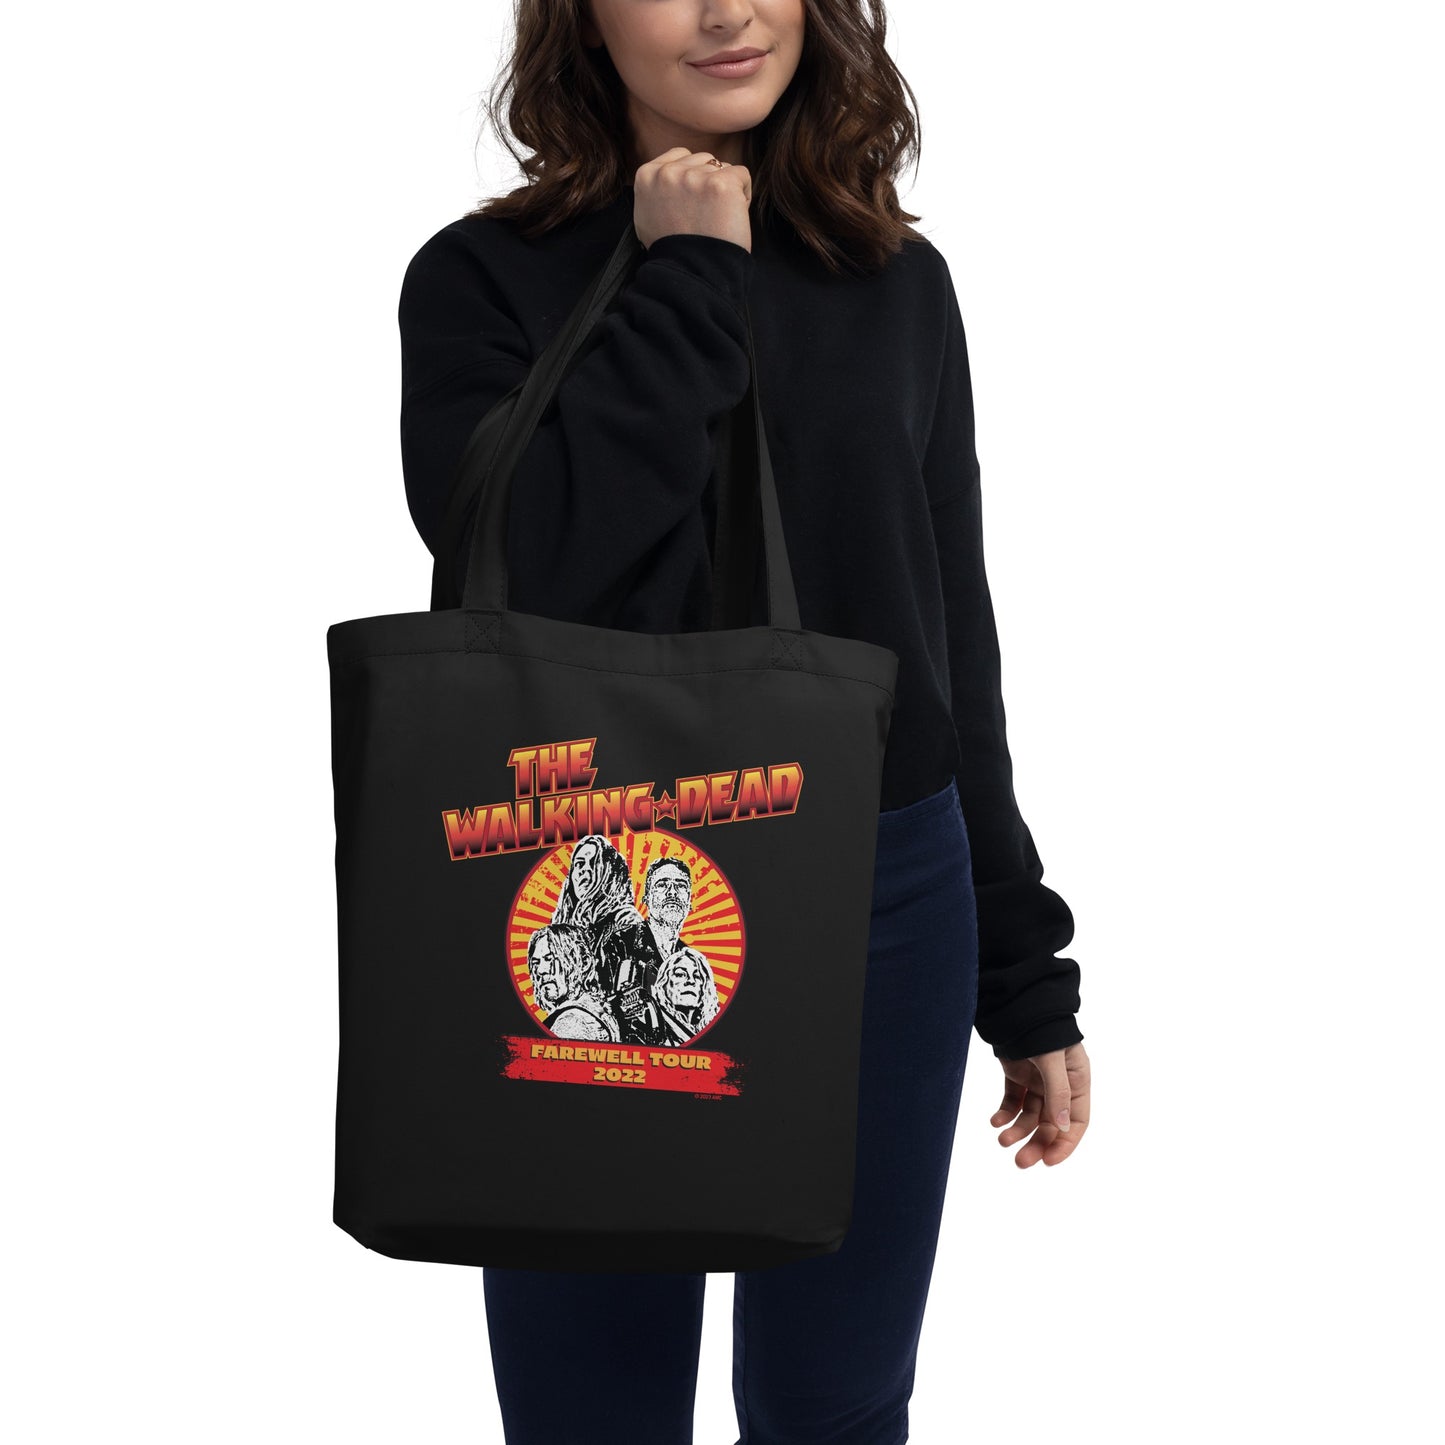 The Walking Dead Farewell Tour Band Eco Tote Bag